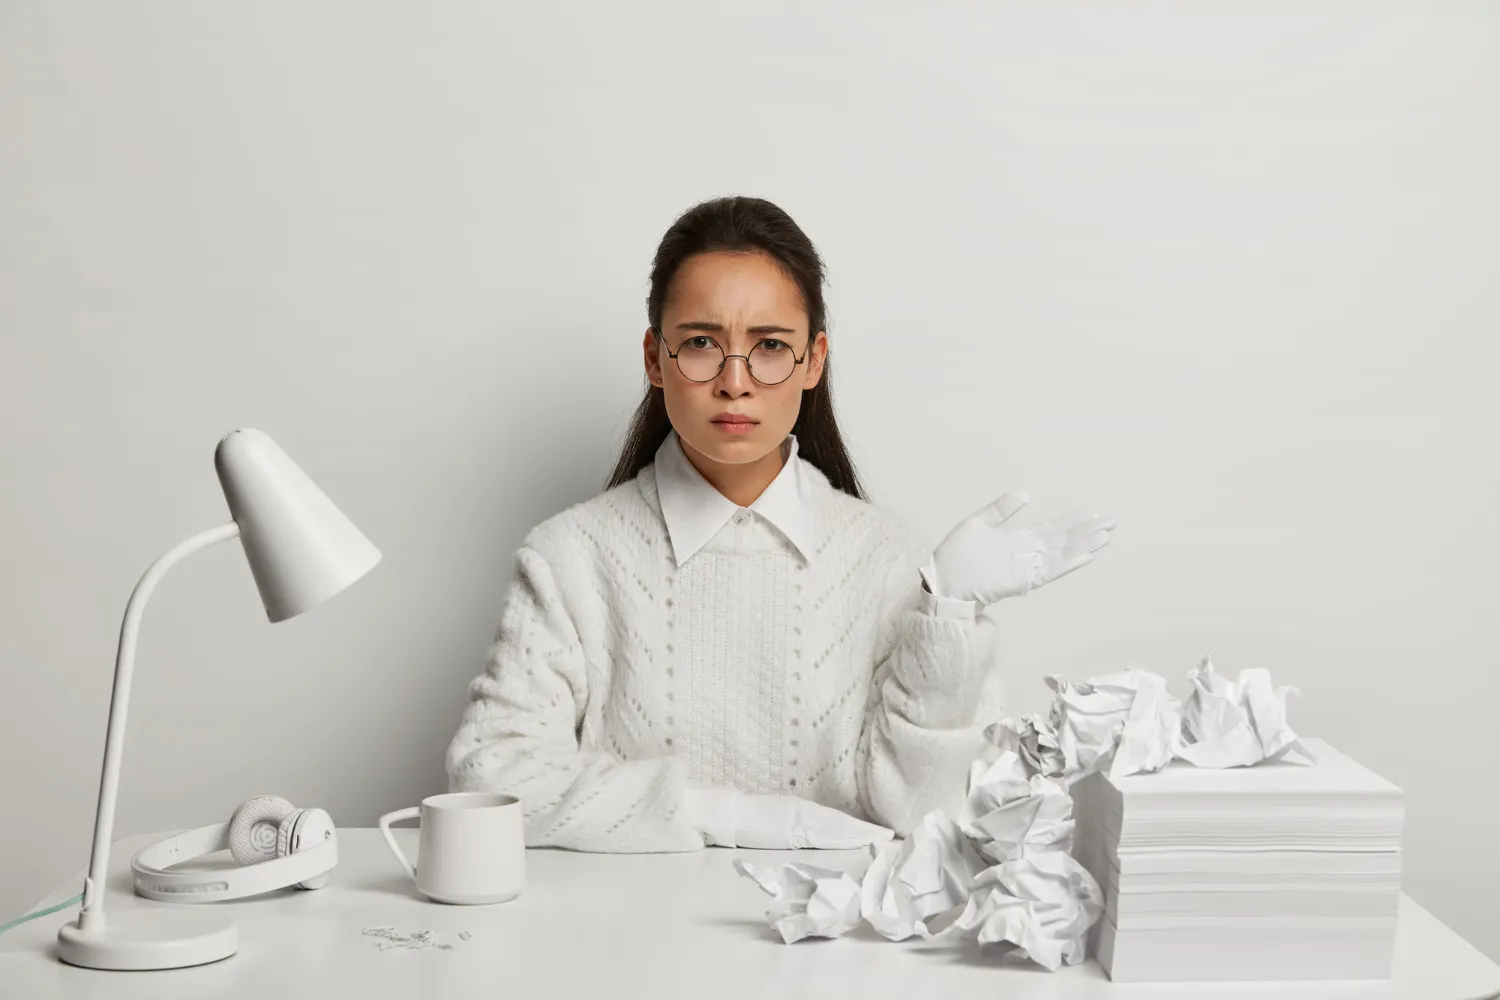 Woman with a perplexed expression surrounded by crumpled papers at her desk, symbolizing common resume mistakes highlighted in JOH Partners' blog.